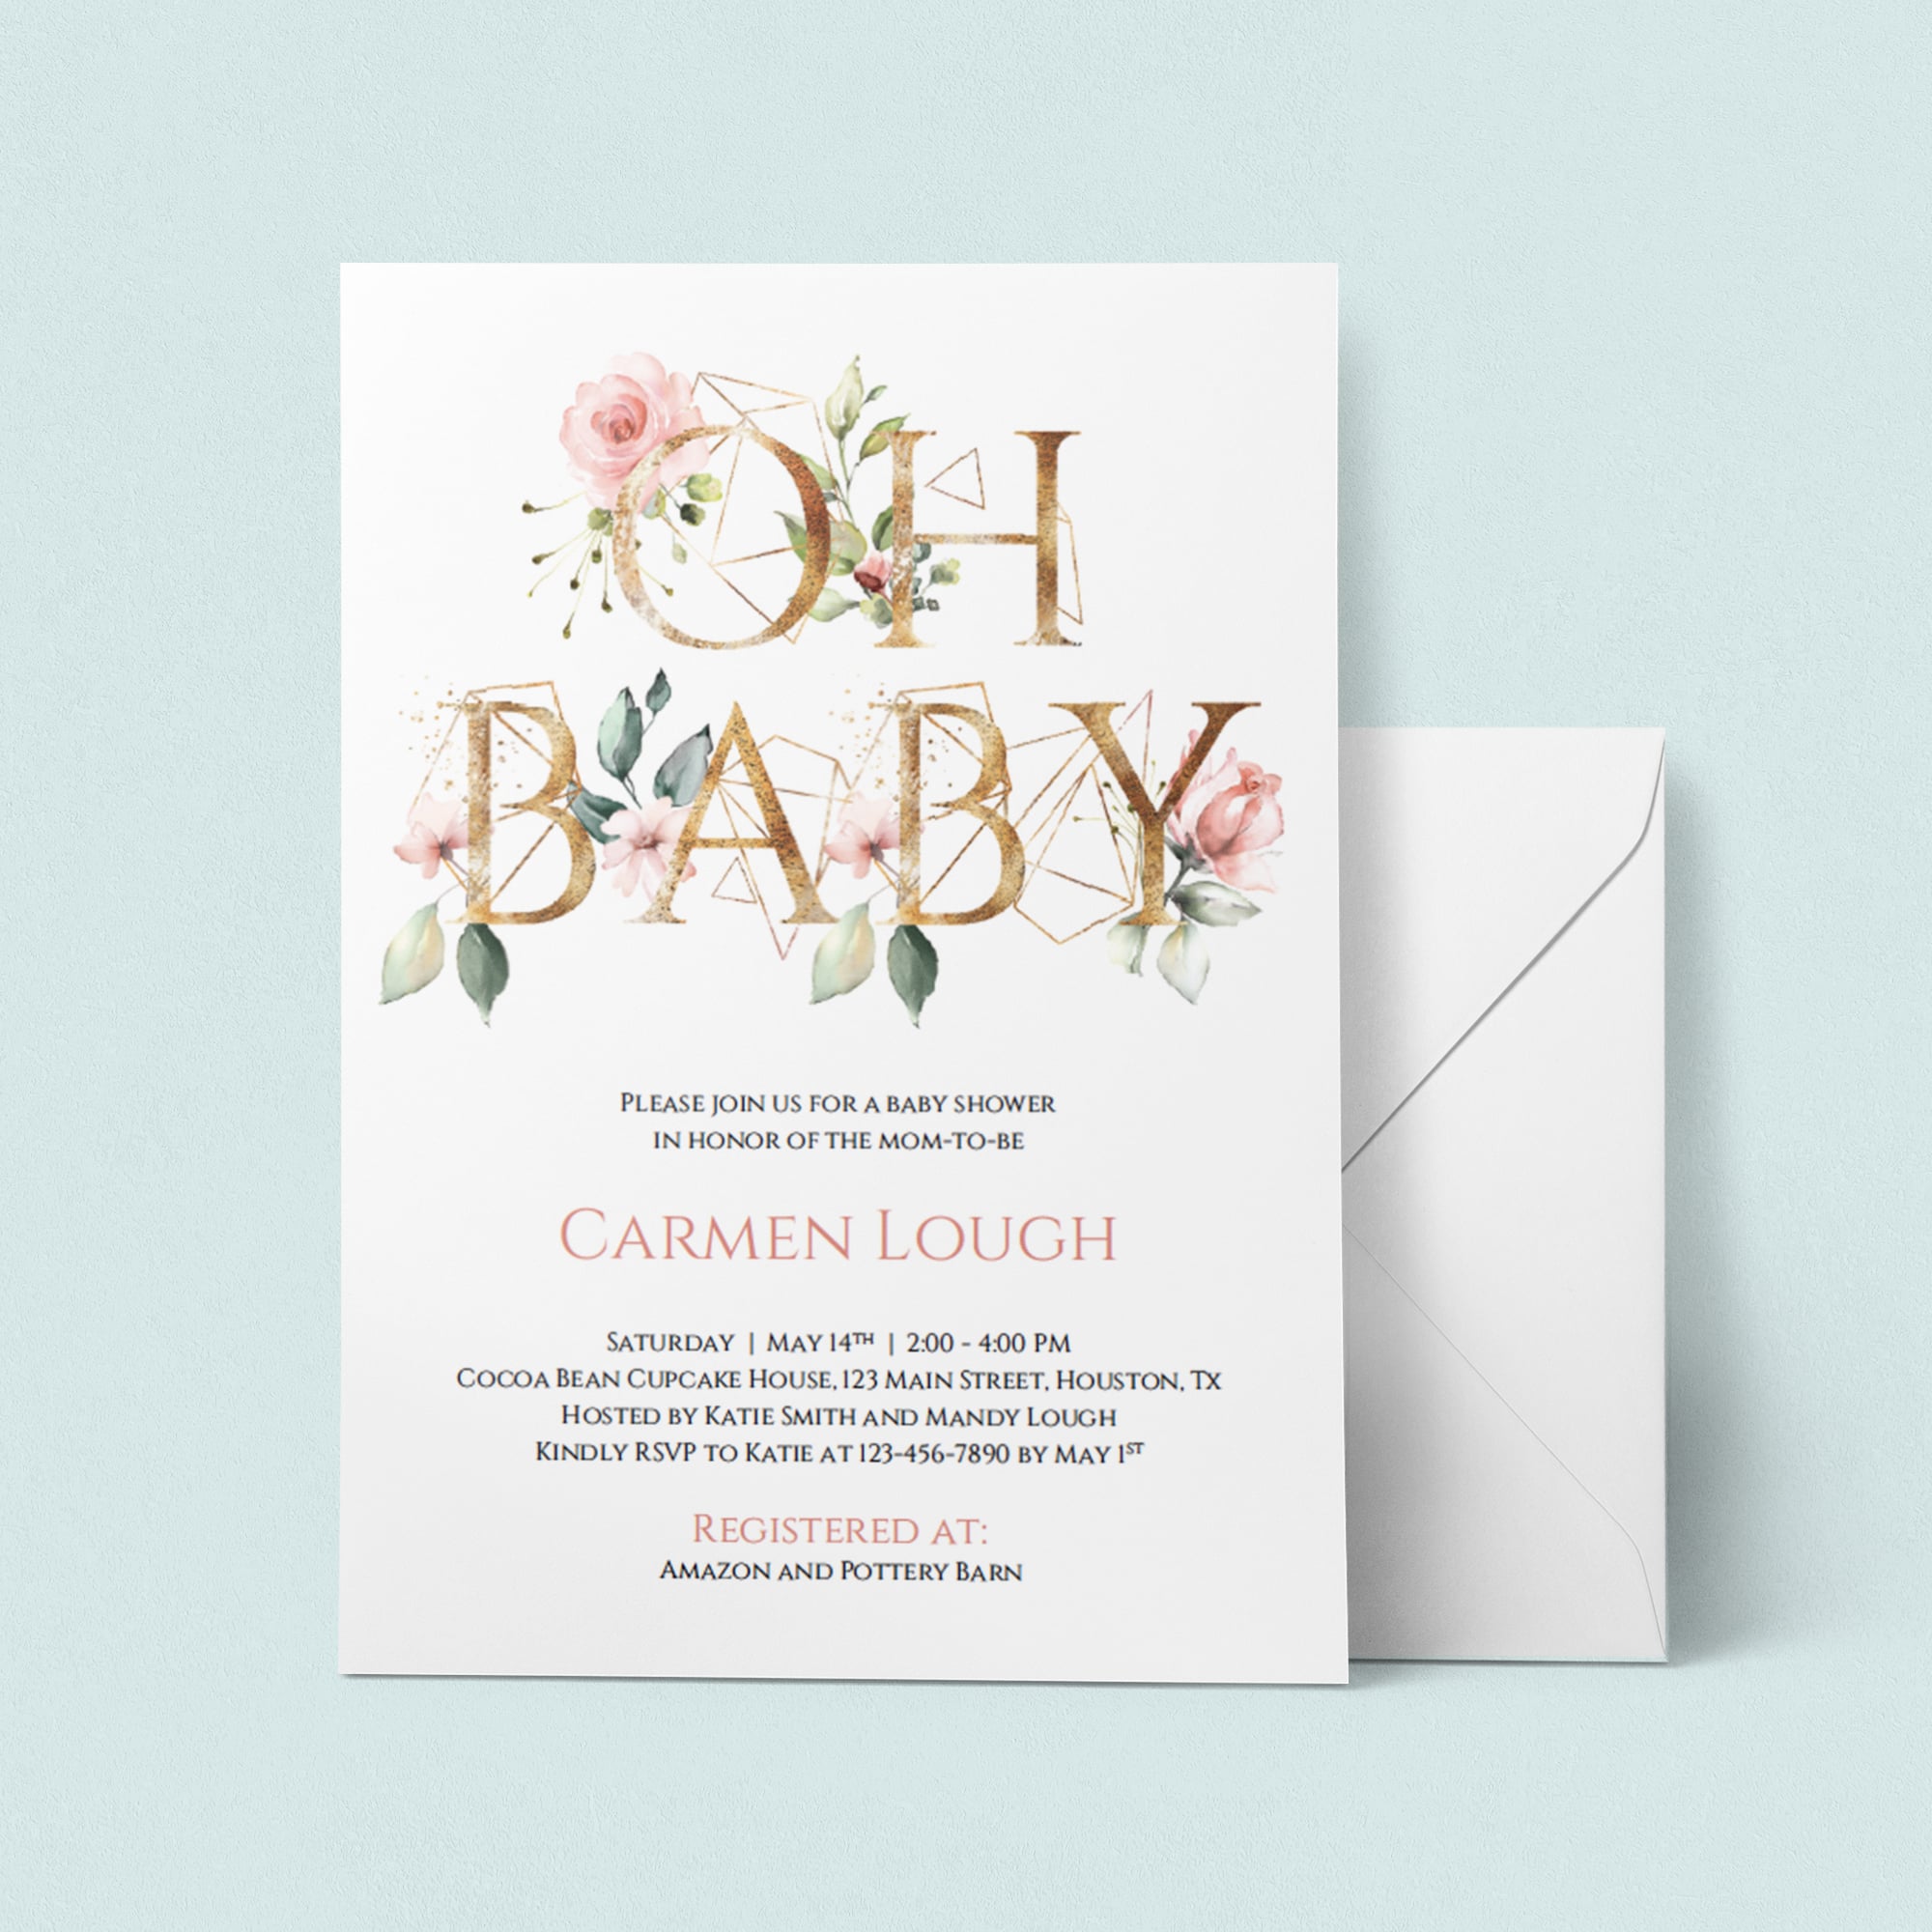 Blush pink and gold modern baby shower invite template by LittleSizzle